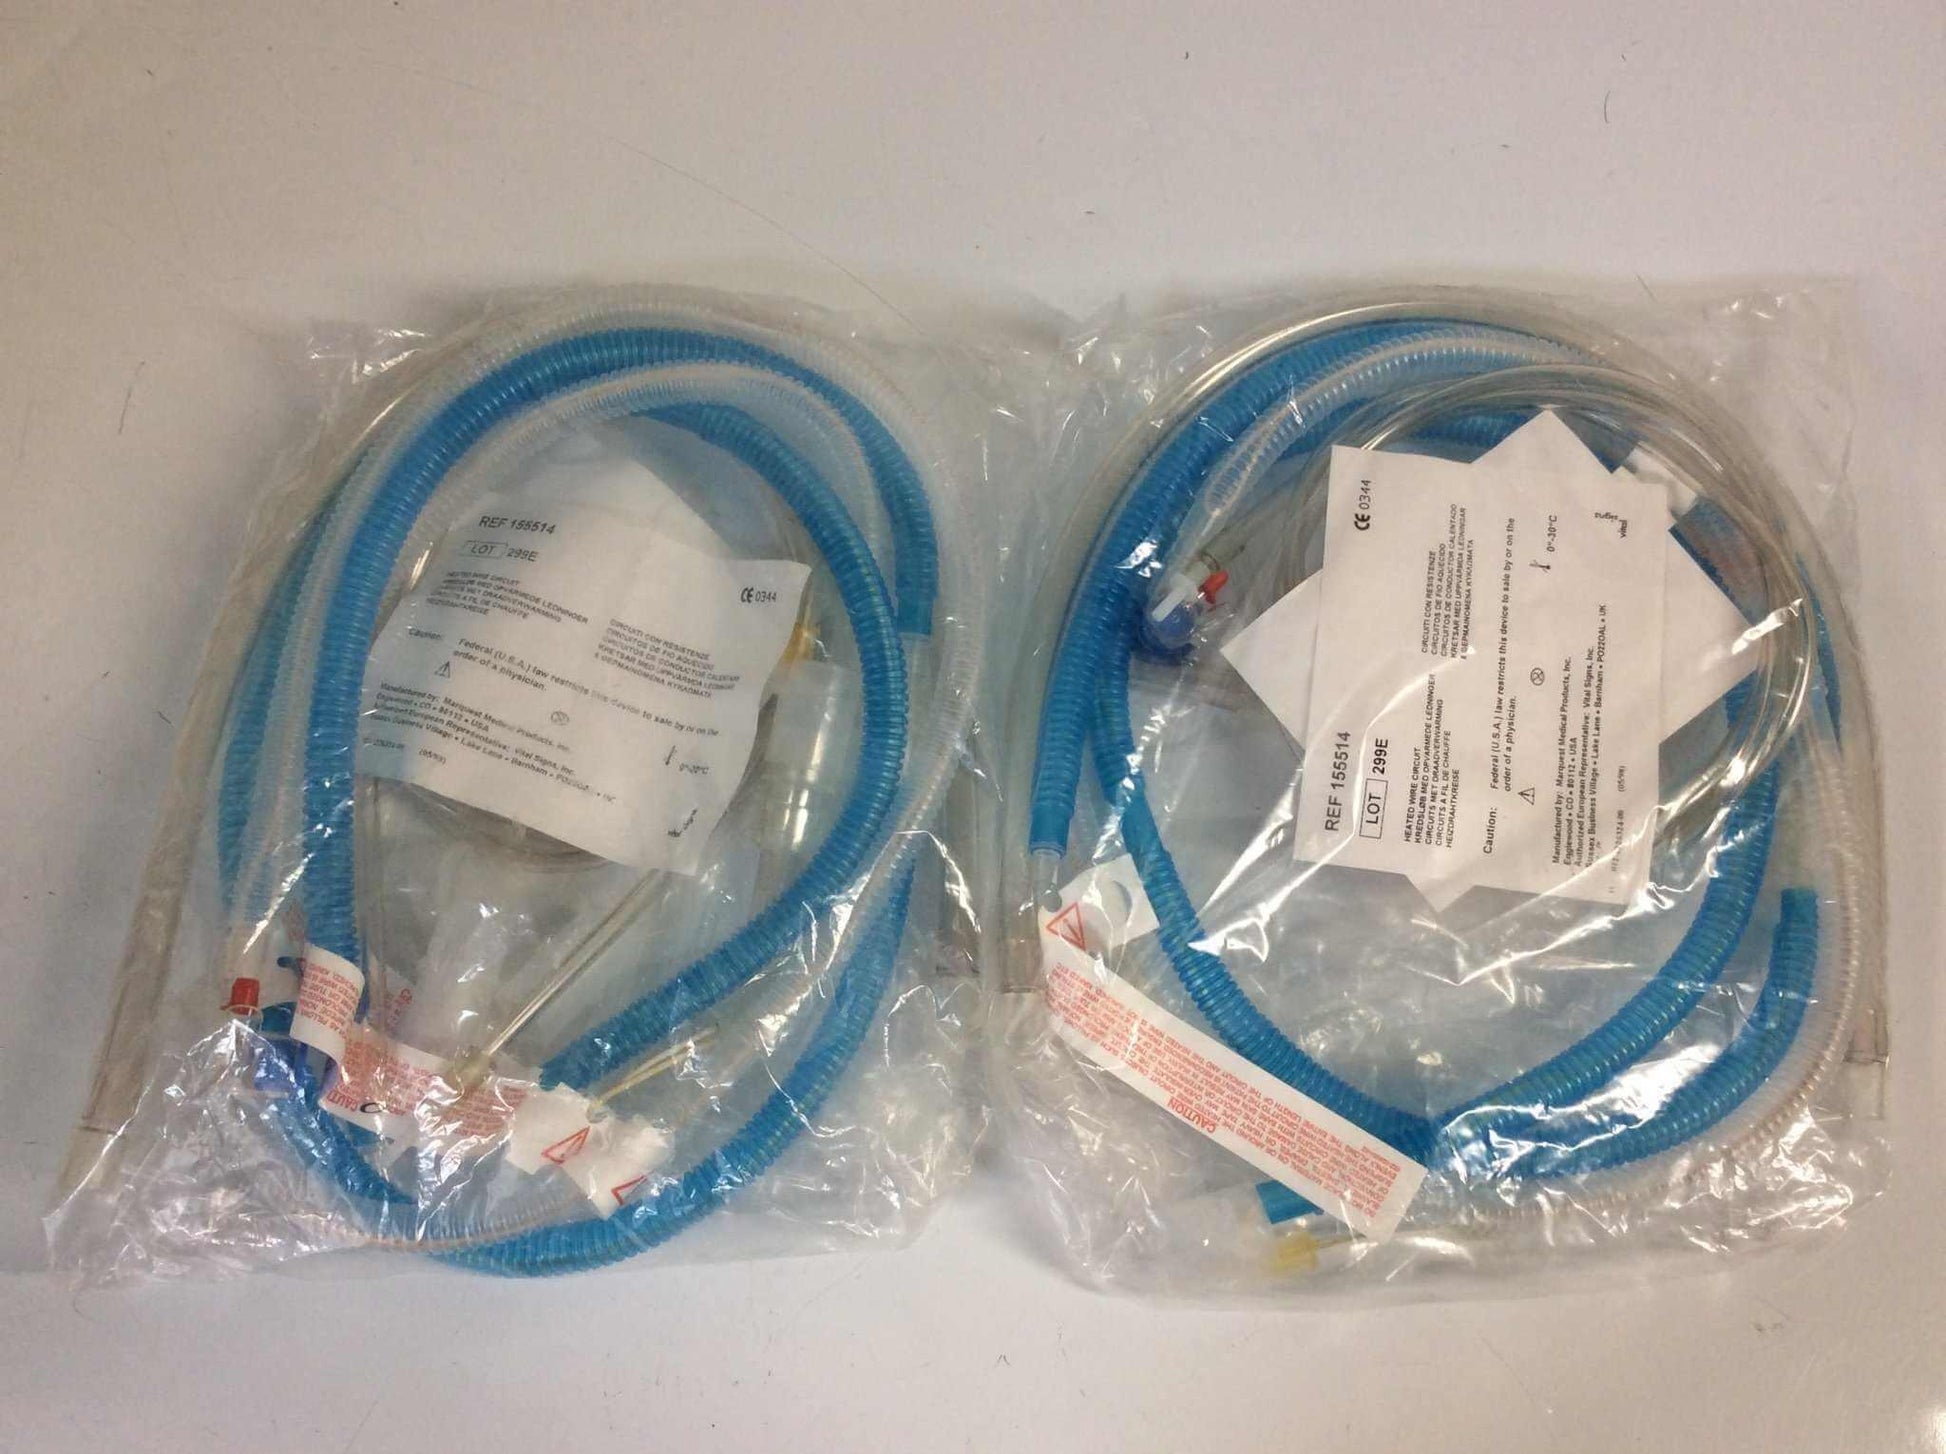 Lot of 2 NEW Marquest Medical Products Pediatric Heated Wire Circuit 155514 - MBR Medicals